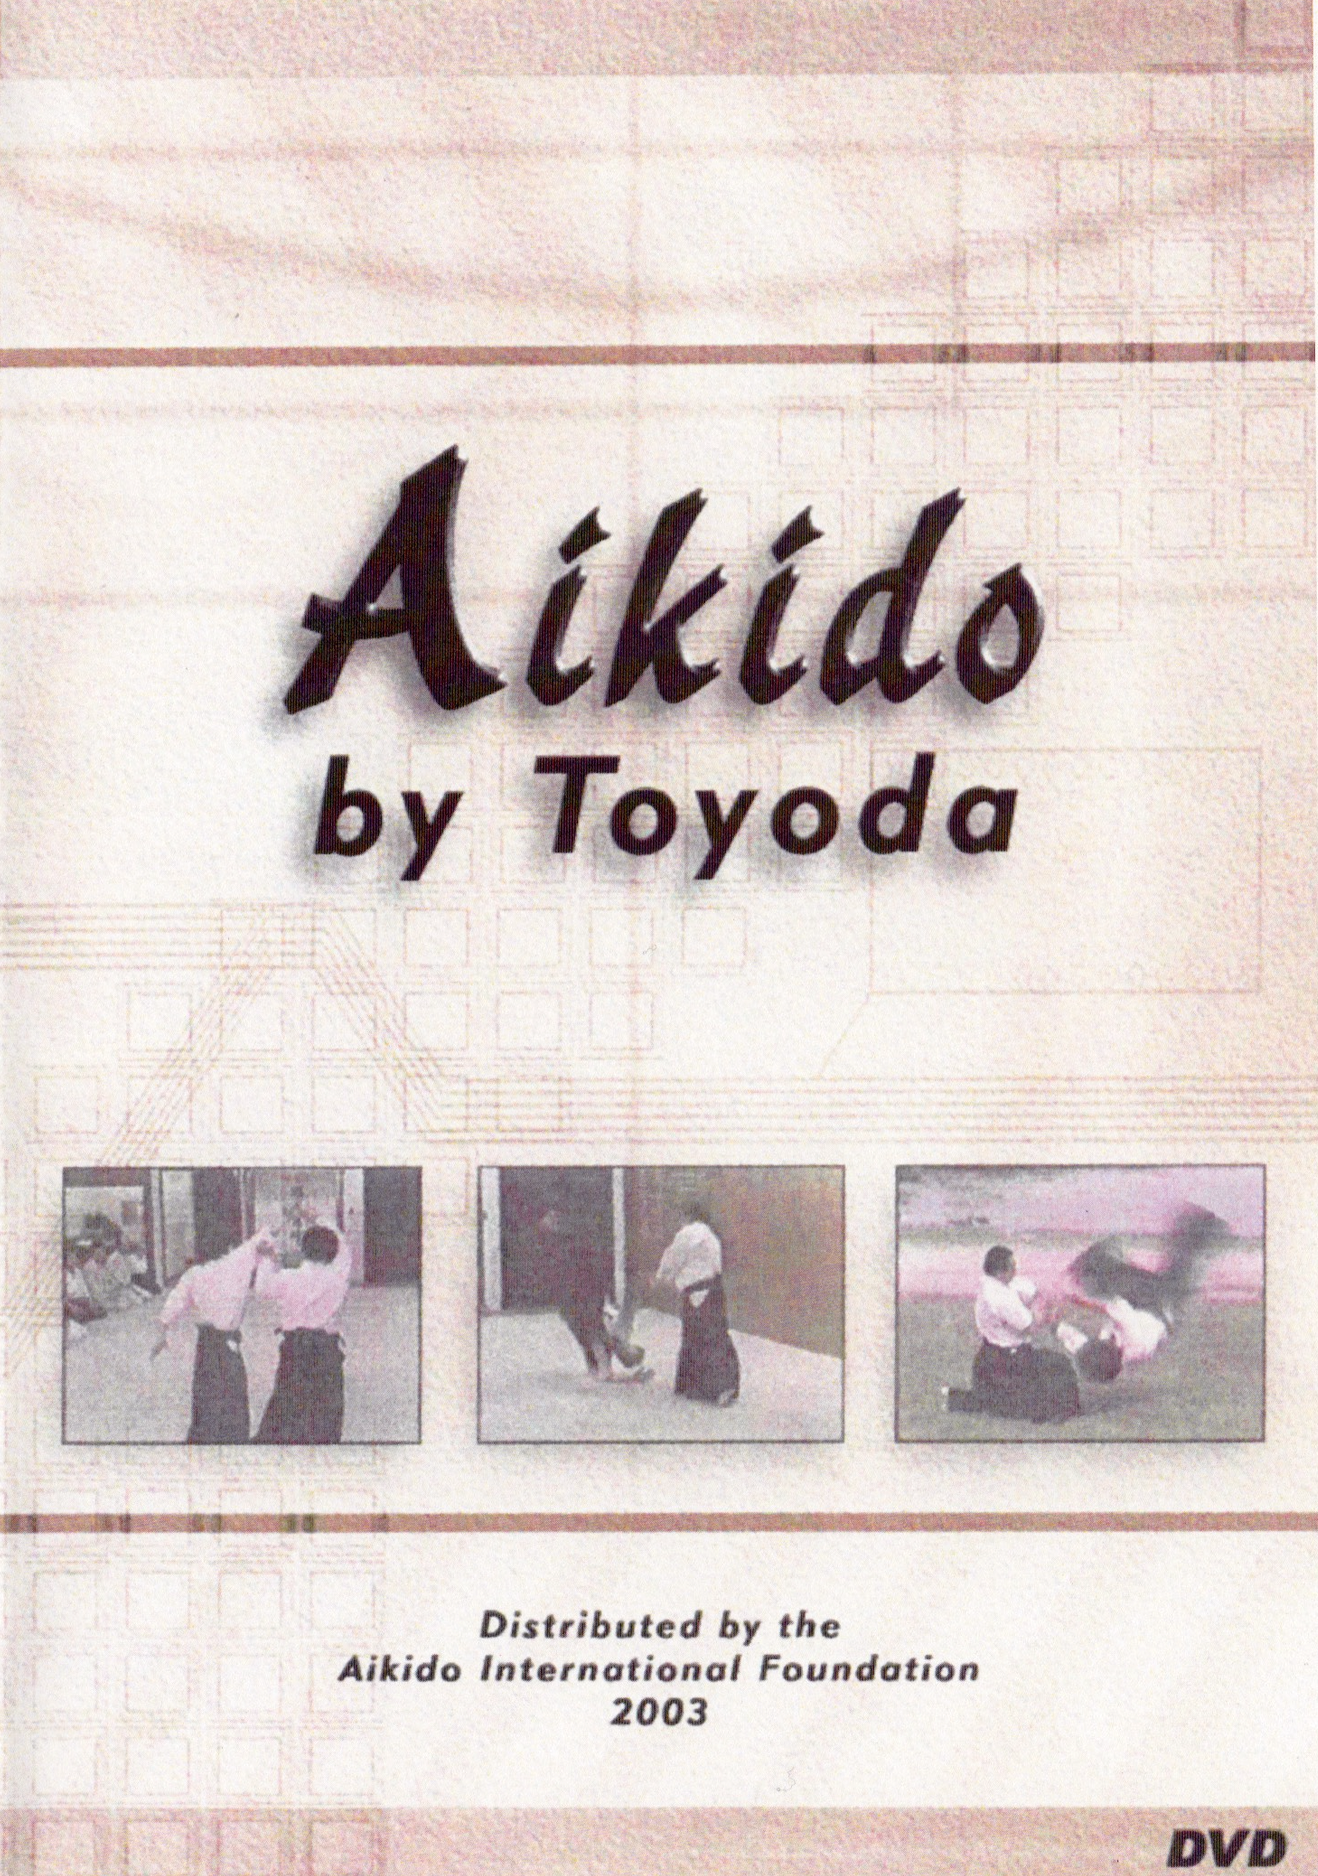 Aikido by Fumio Toyoda DVD (Preowned) - Budovideos Inc